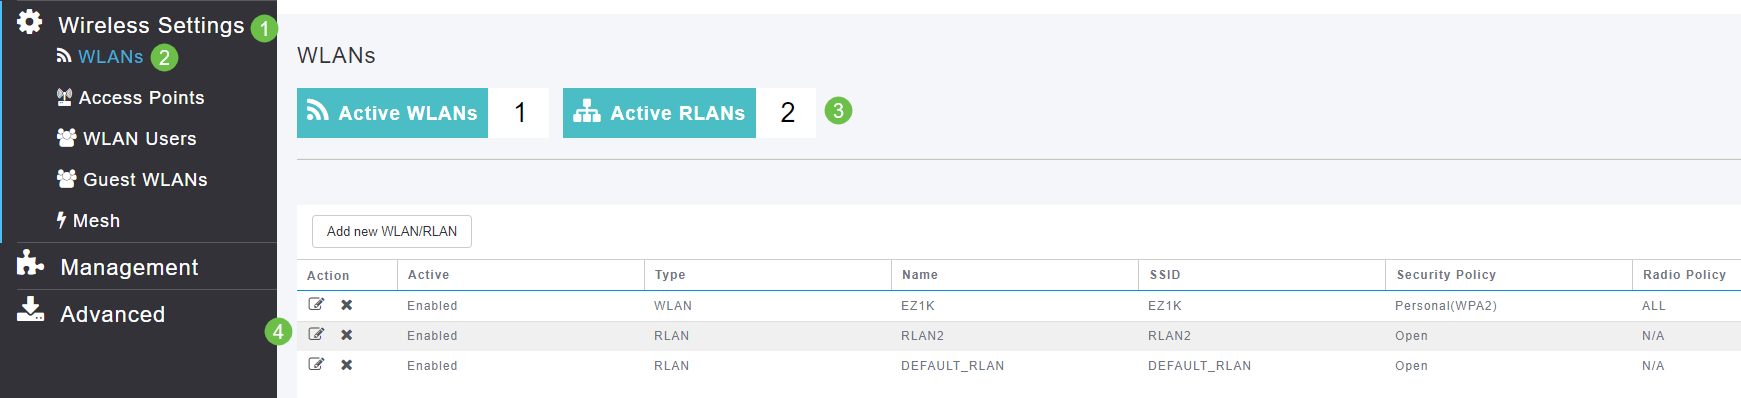 To view the RLAN you created, select Wireless Settings > WLANs. You will see the number of Active RLANs raised to 2 and the new RLAN is listed. 